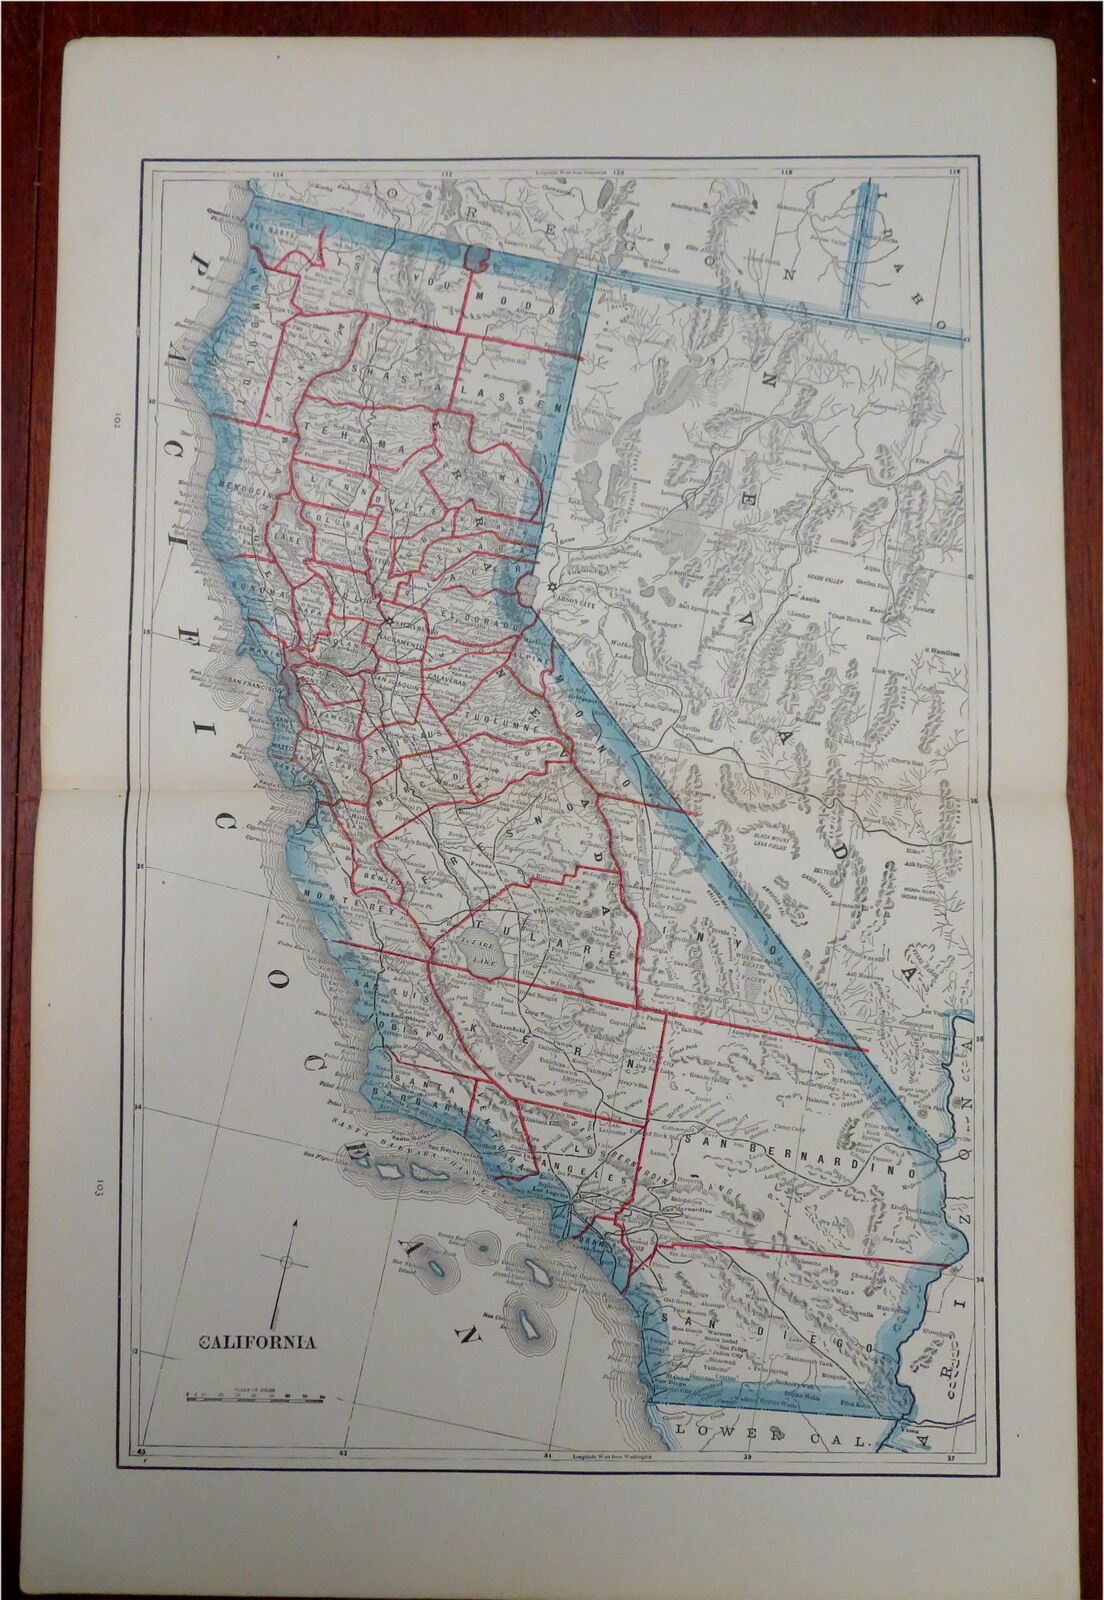 Los Angeles on California State Map. Detailed CA State Map with